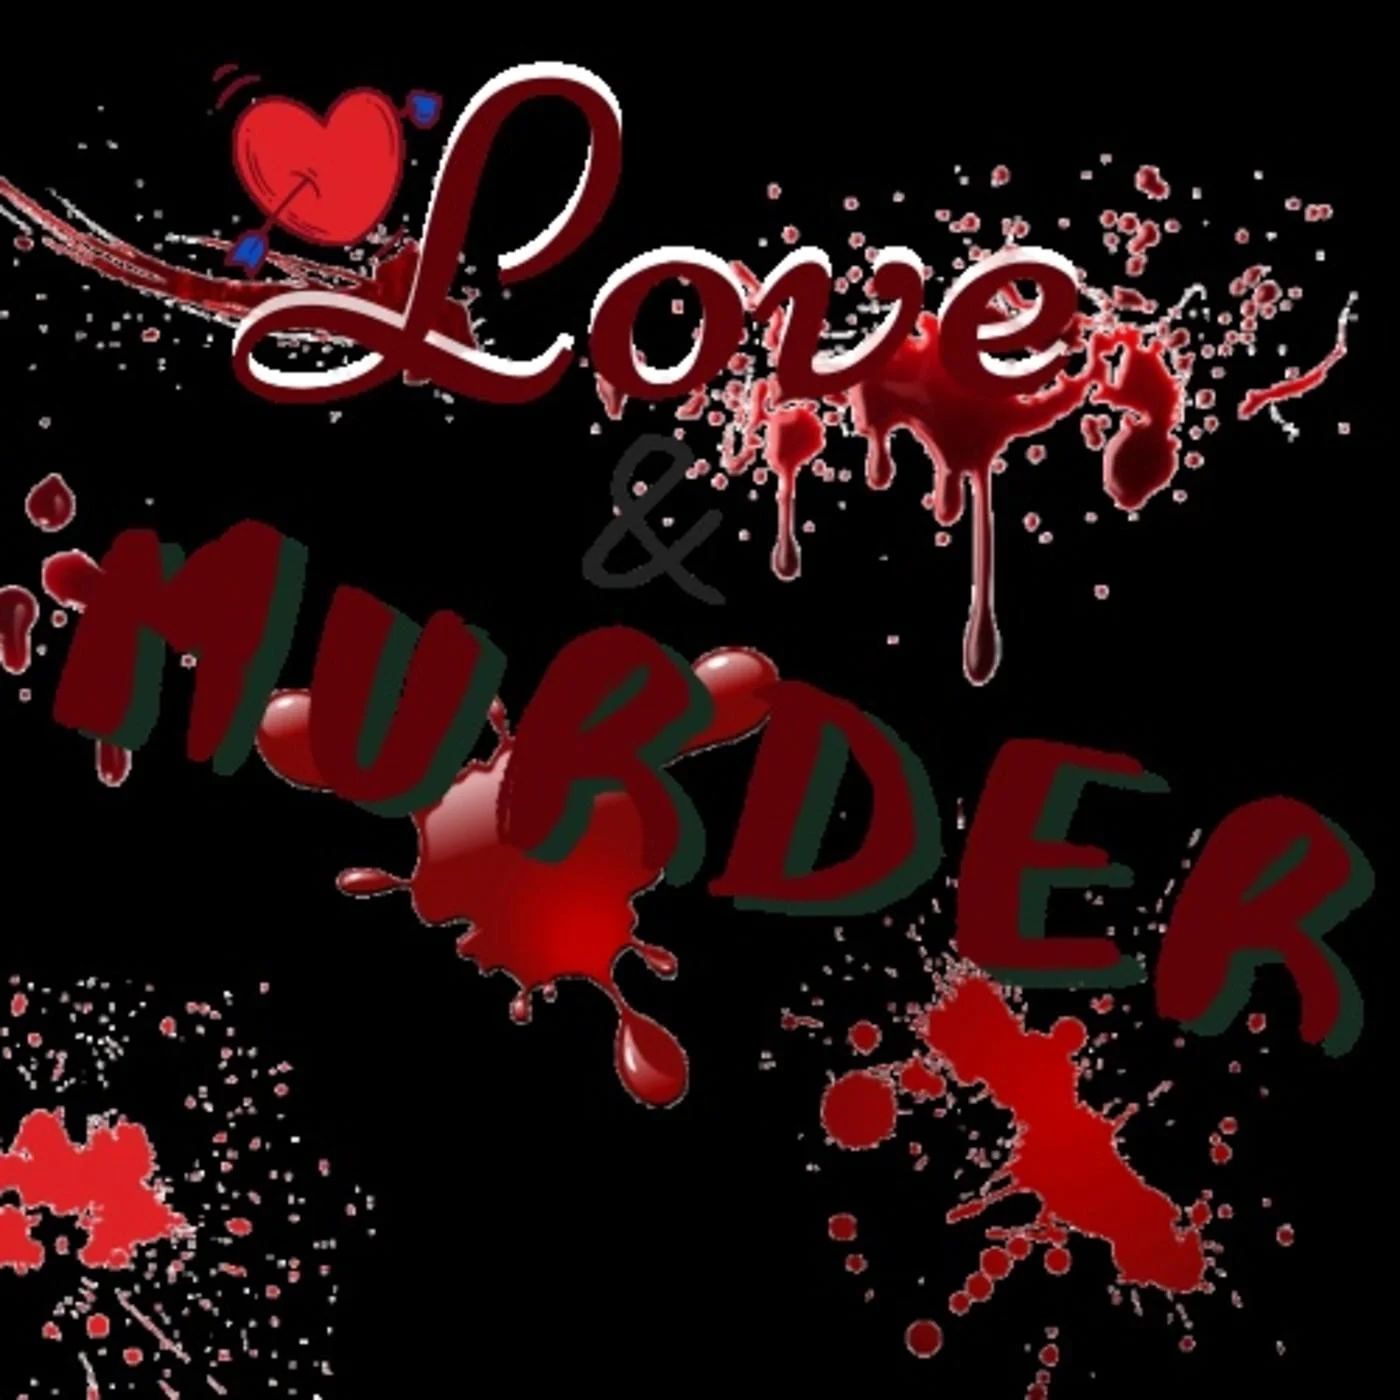 The Despicable Case of Kimberly Maurer and Scott Fremont Schollenberger Jr by Love and Murder